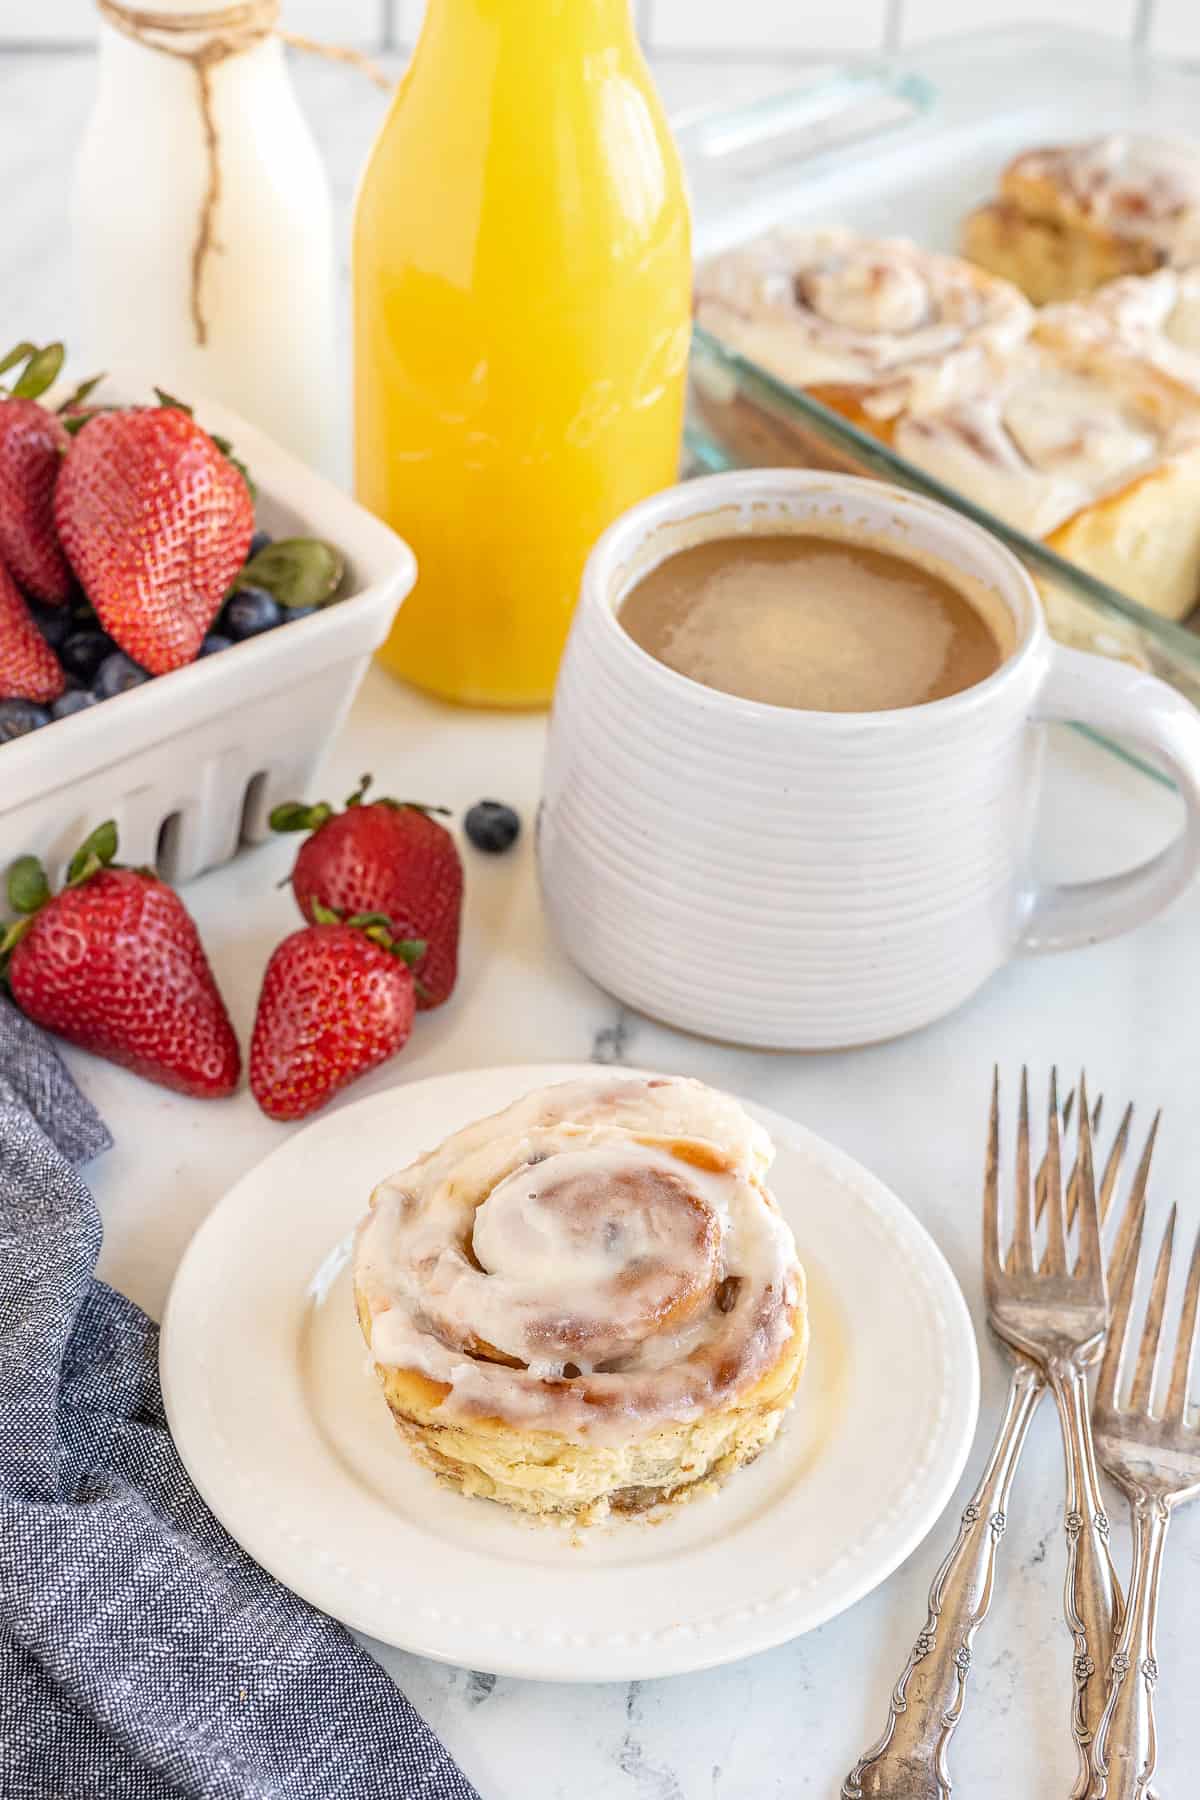 A cinnamon roll on a plate with a cup of coffee and orange juice in the background.